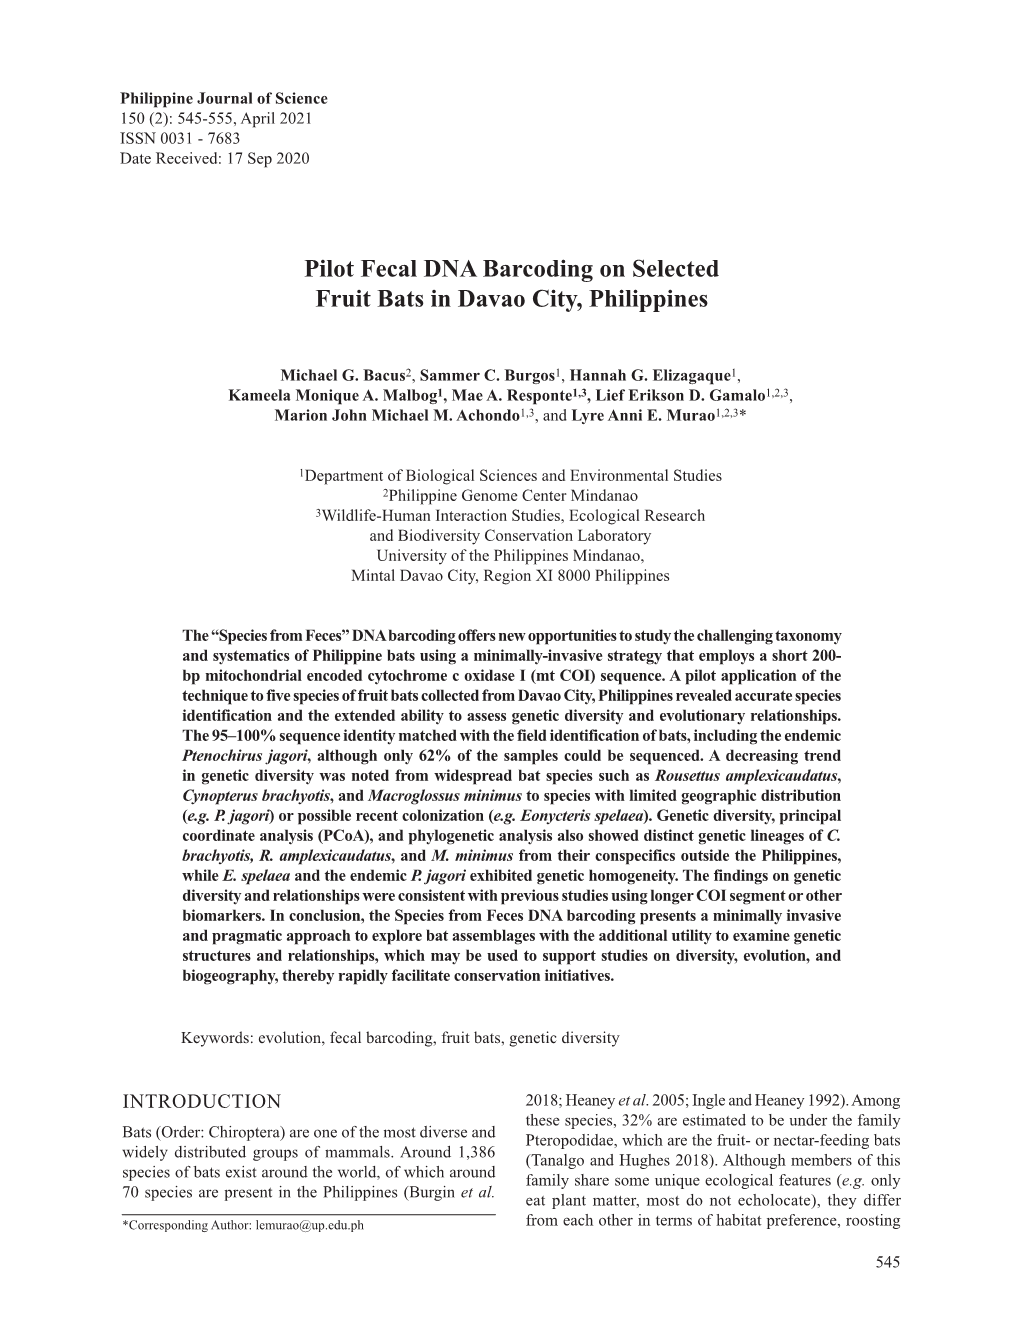 Pilot Fecal DNA Barcoding on Selected Fruit Bats in Davao City, Philippines